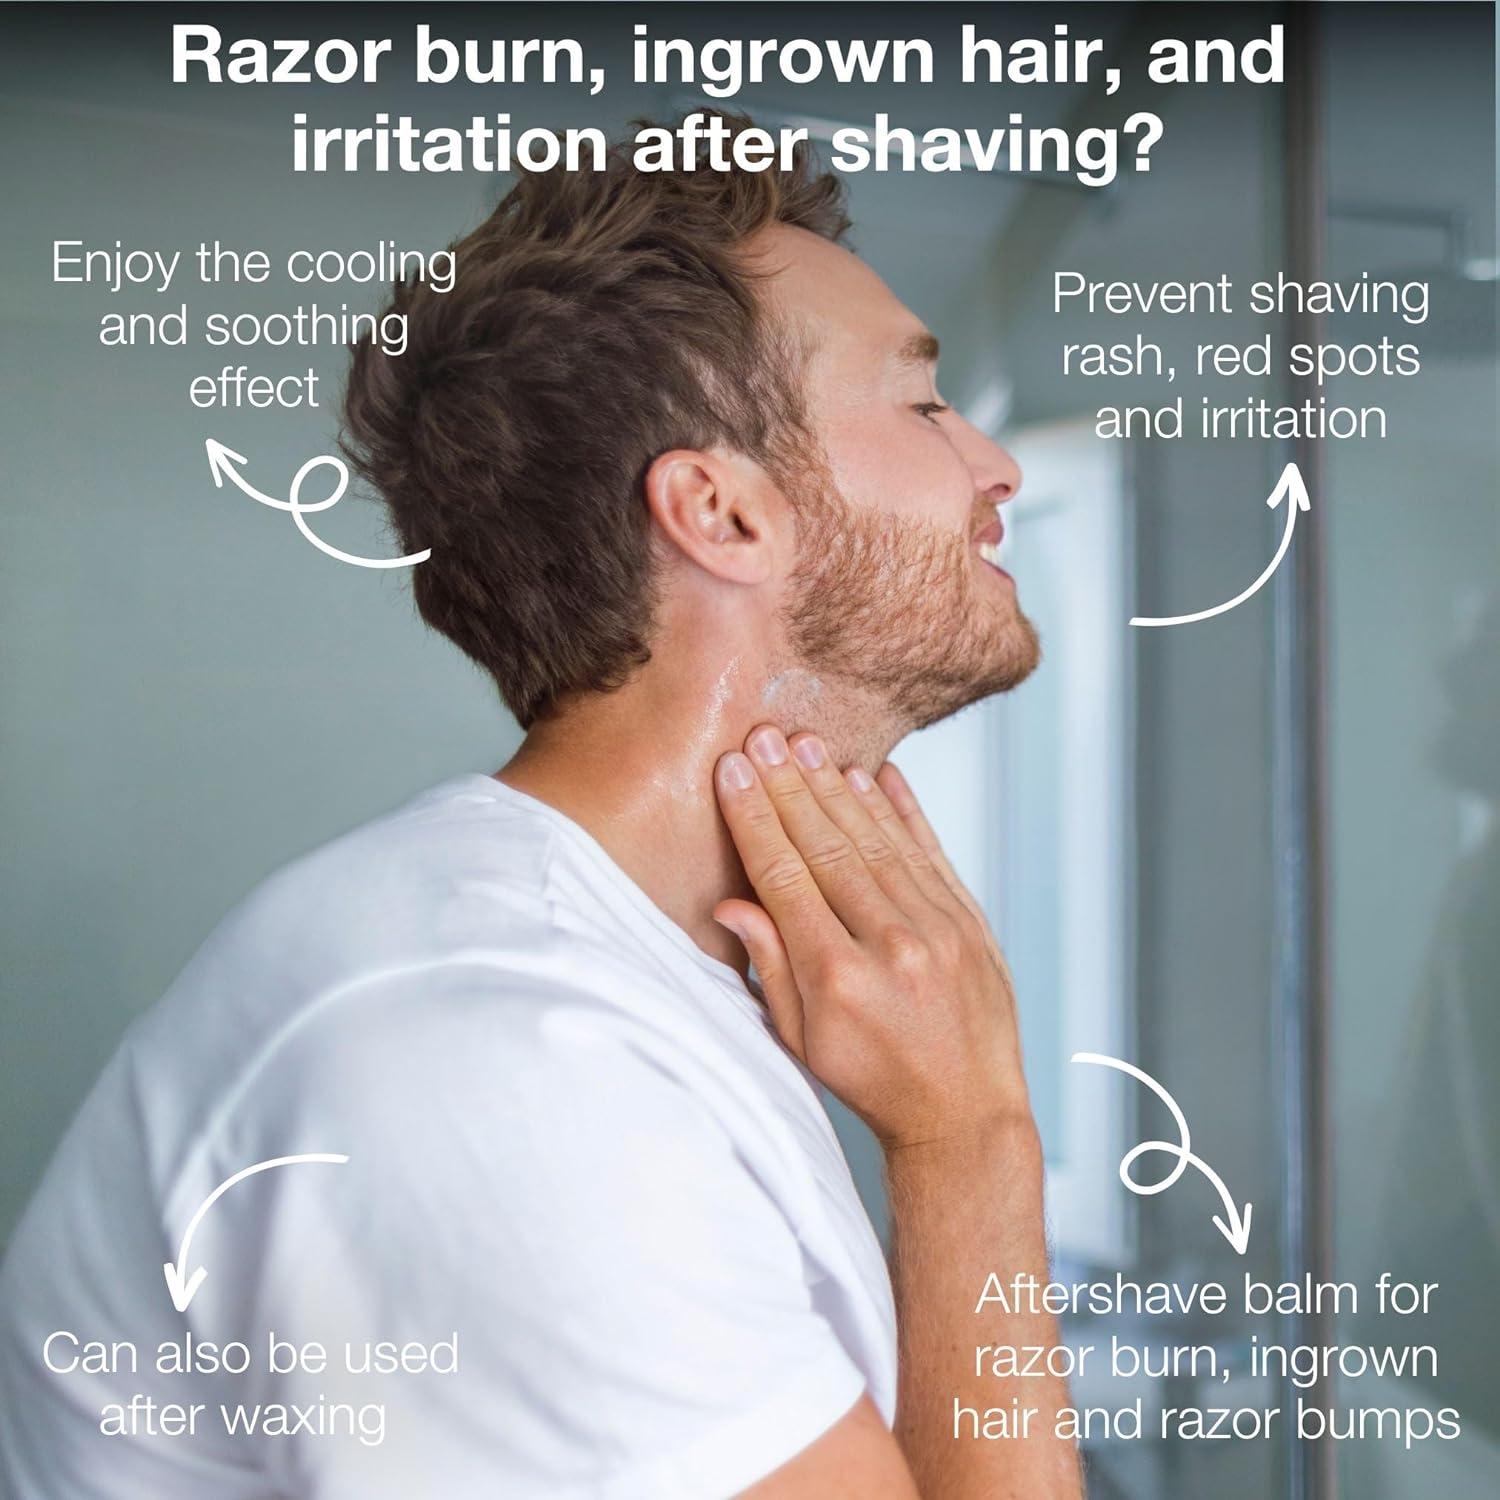 Shaving rash - How to prevent it once and for all